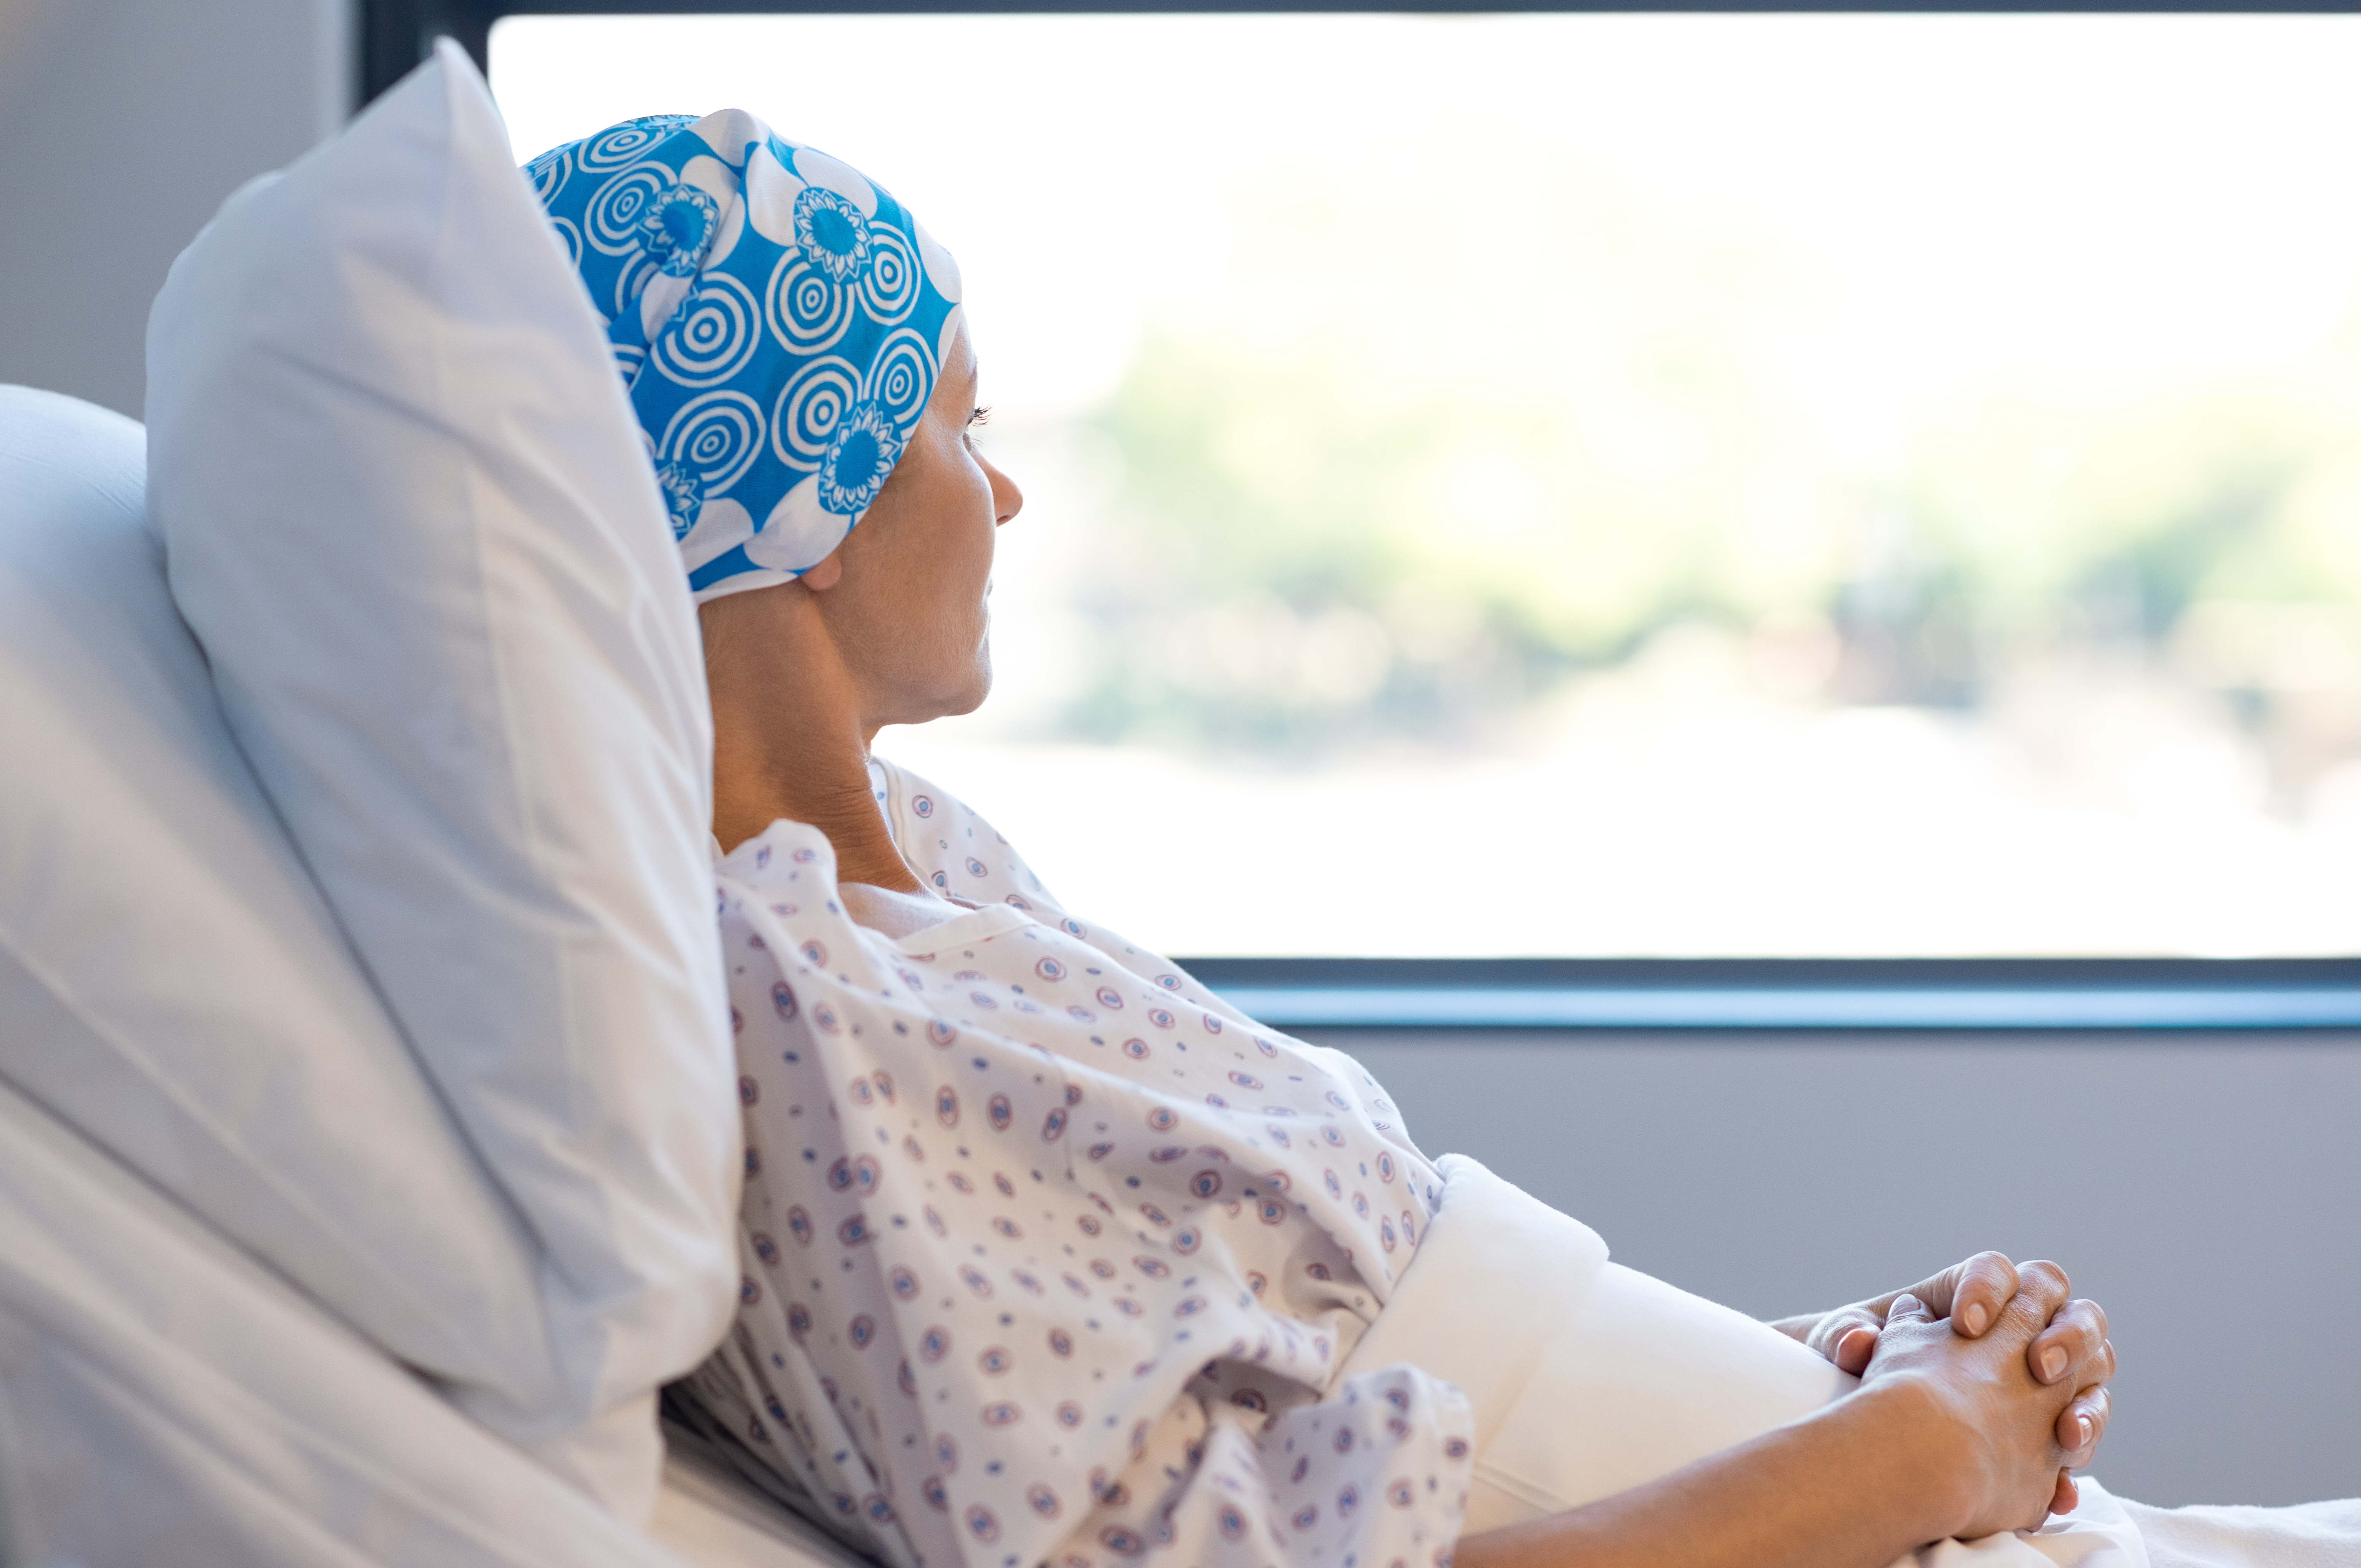 Woman wearing a bandana around her head lying in a hospital bed | Source: Shutterstock